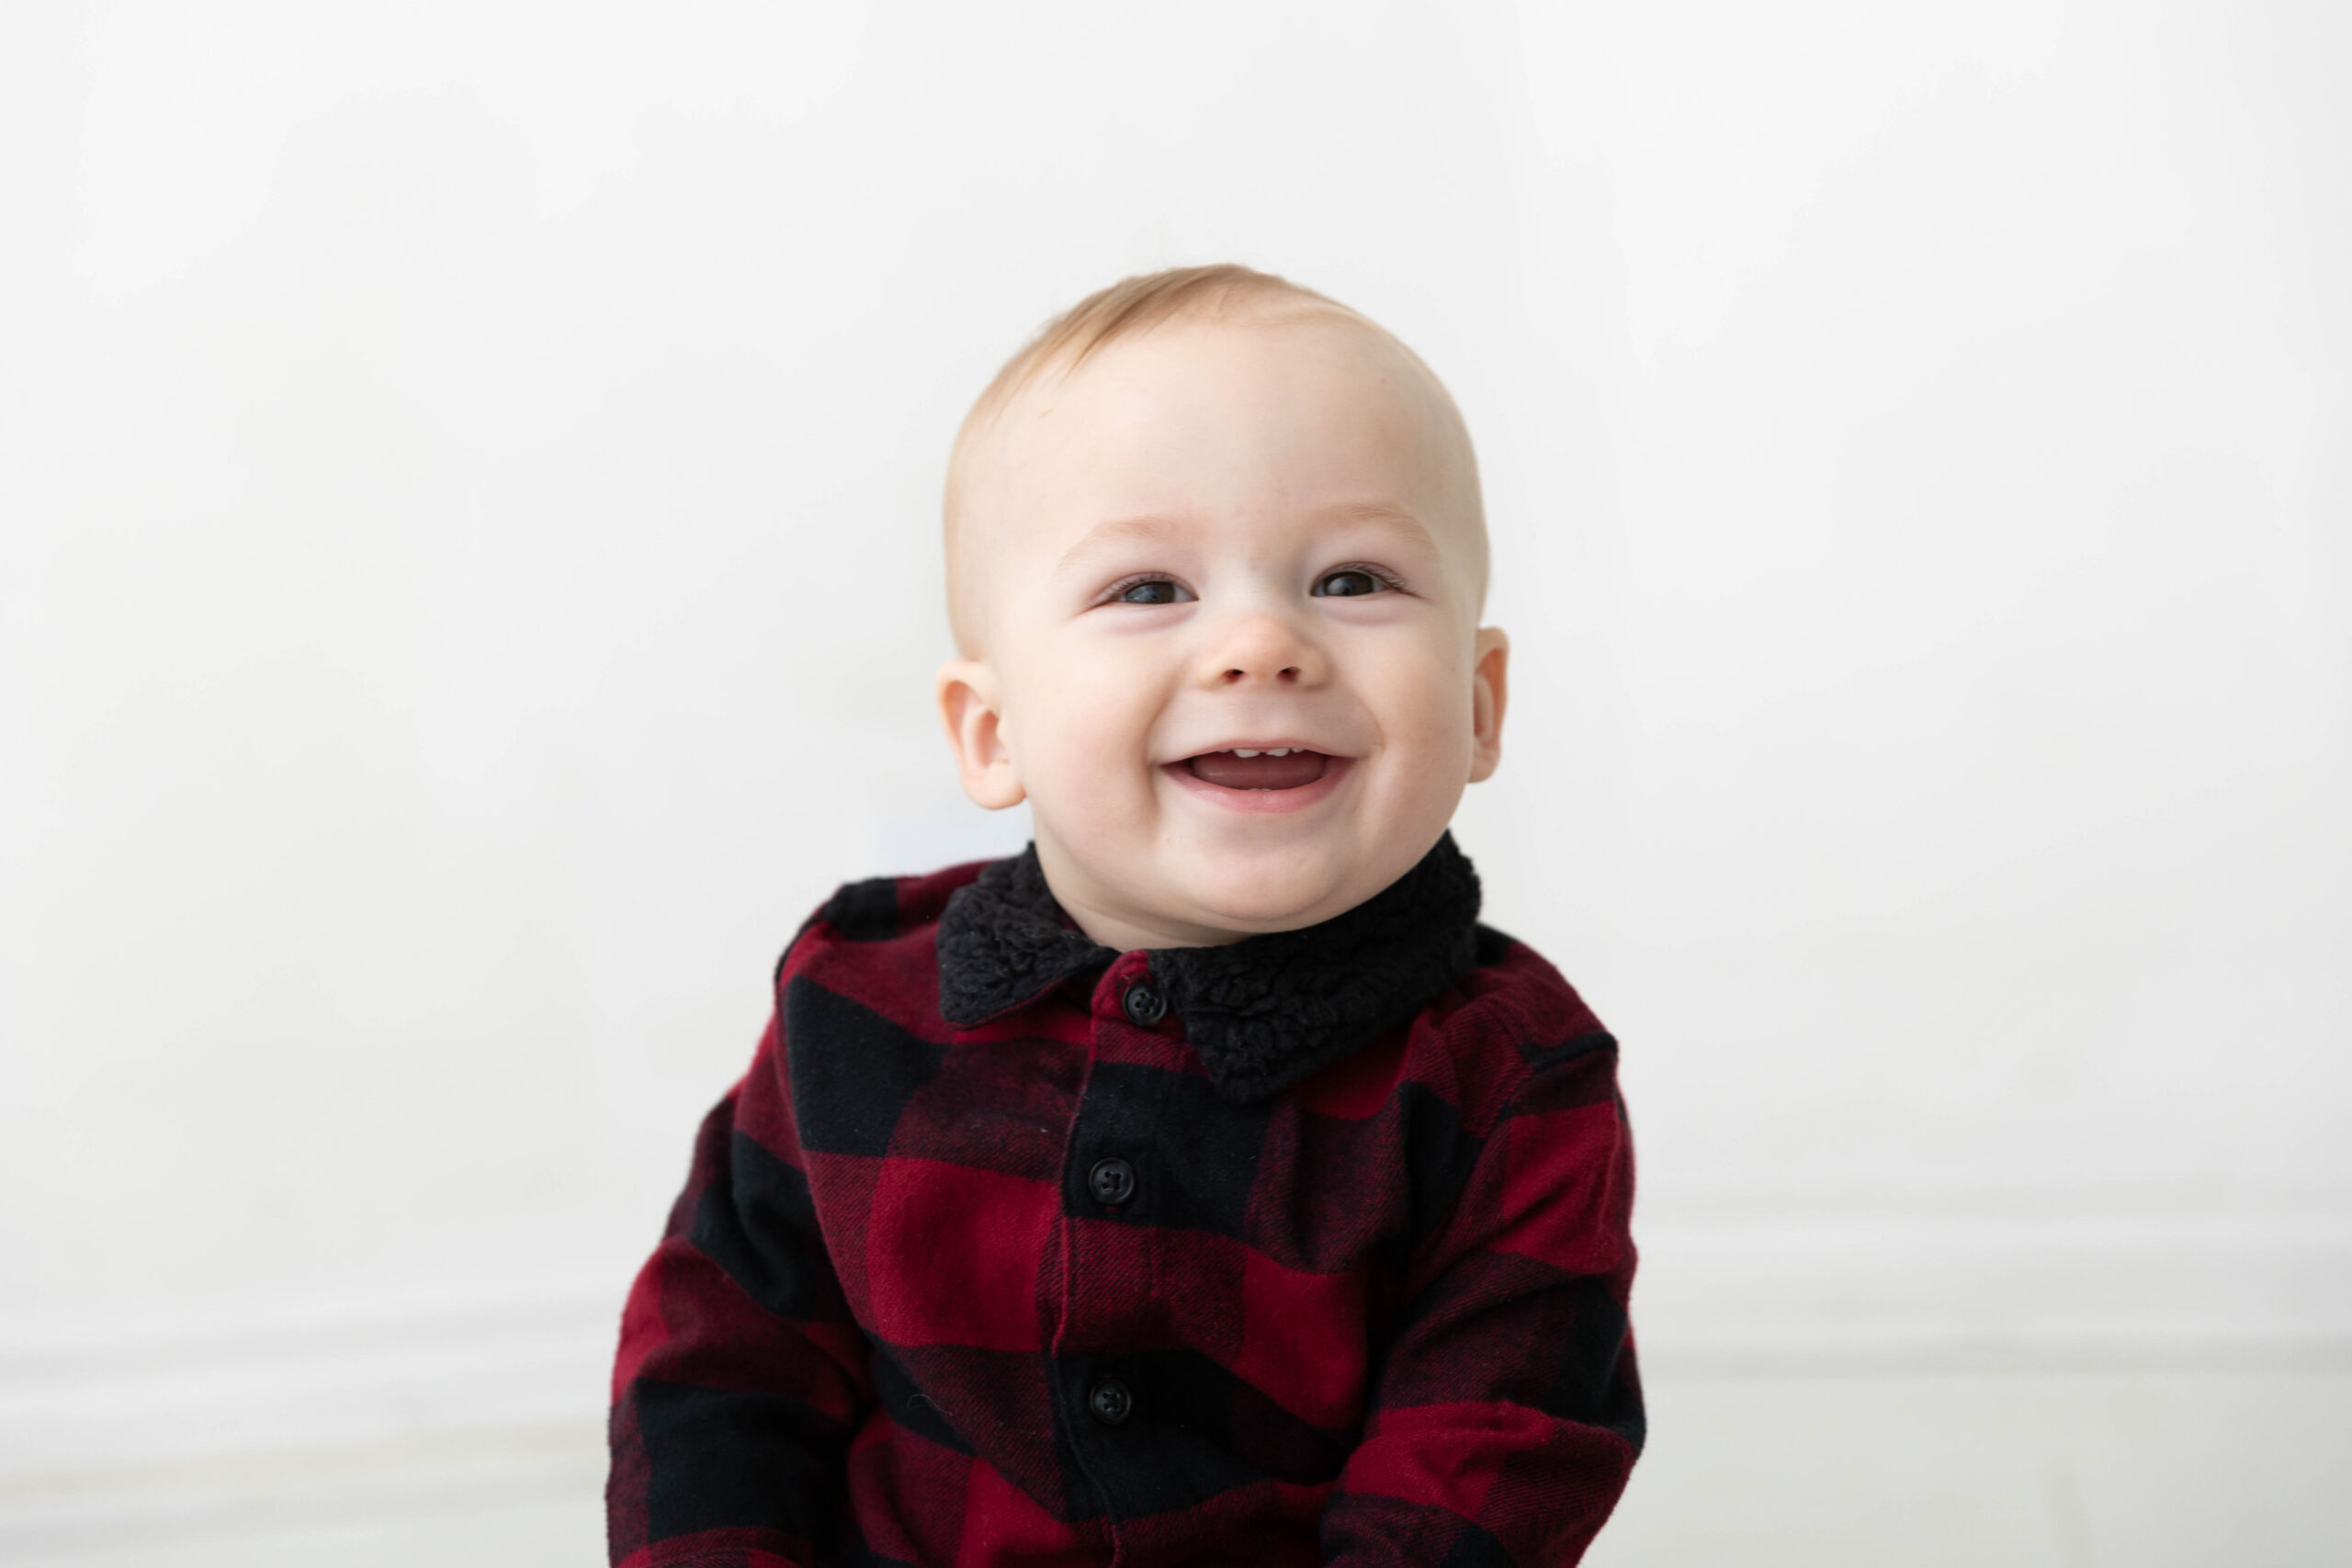 Adorable photo of a toddler in American fork Studio